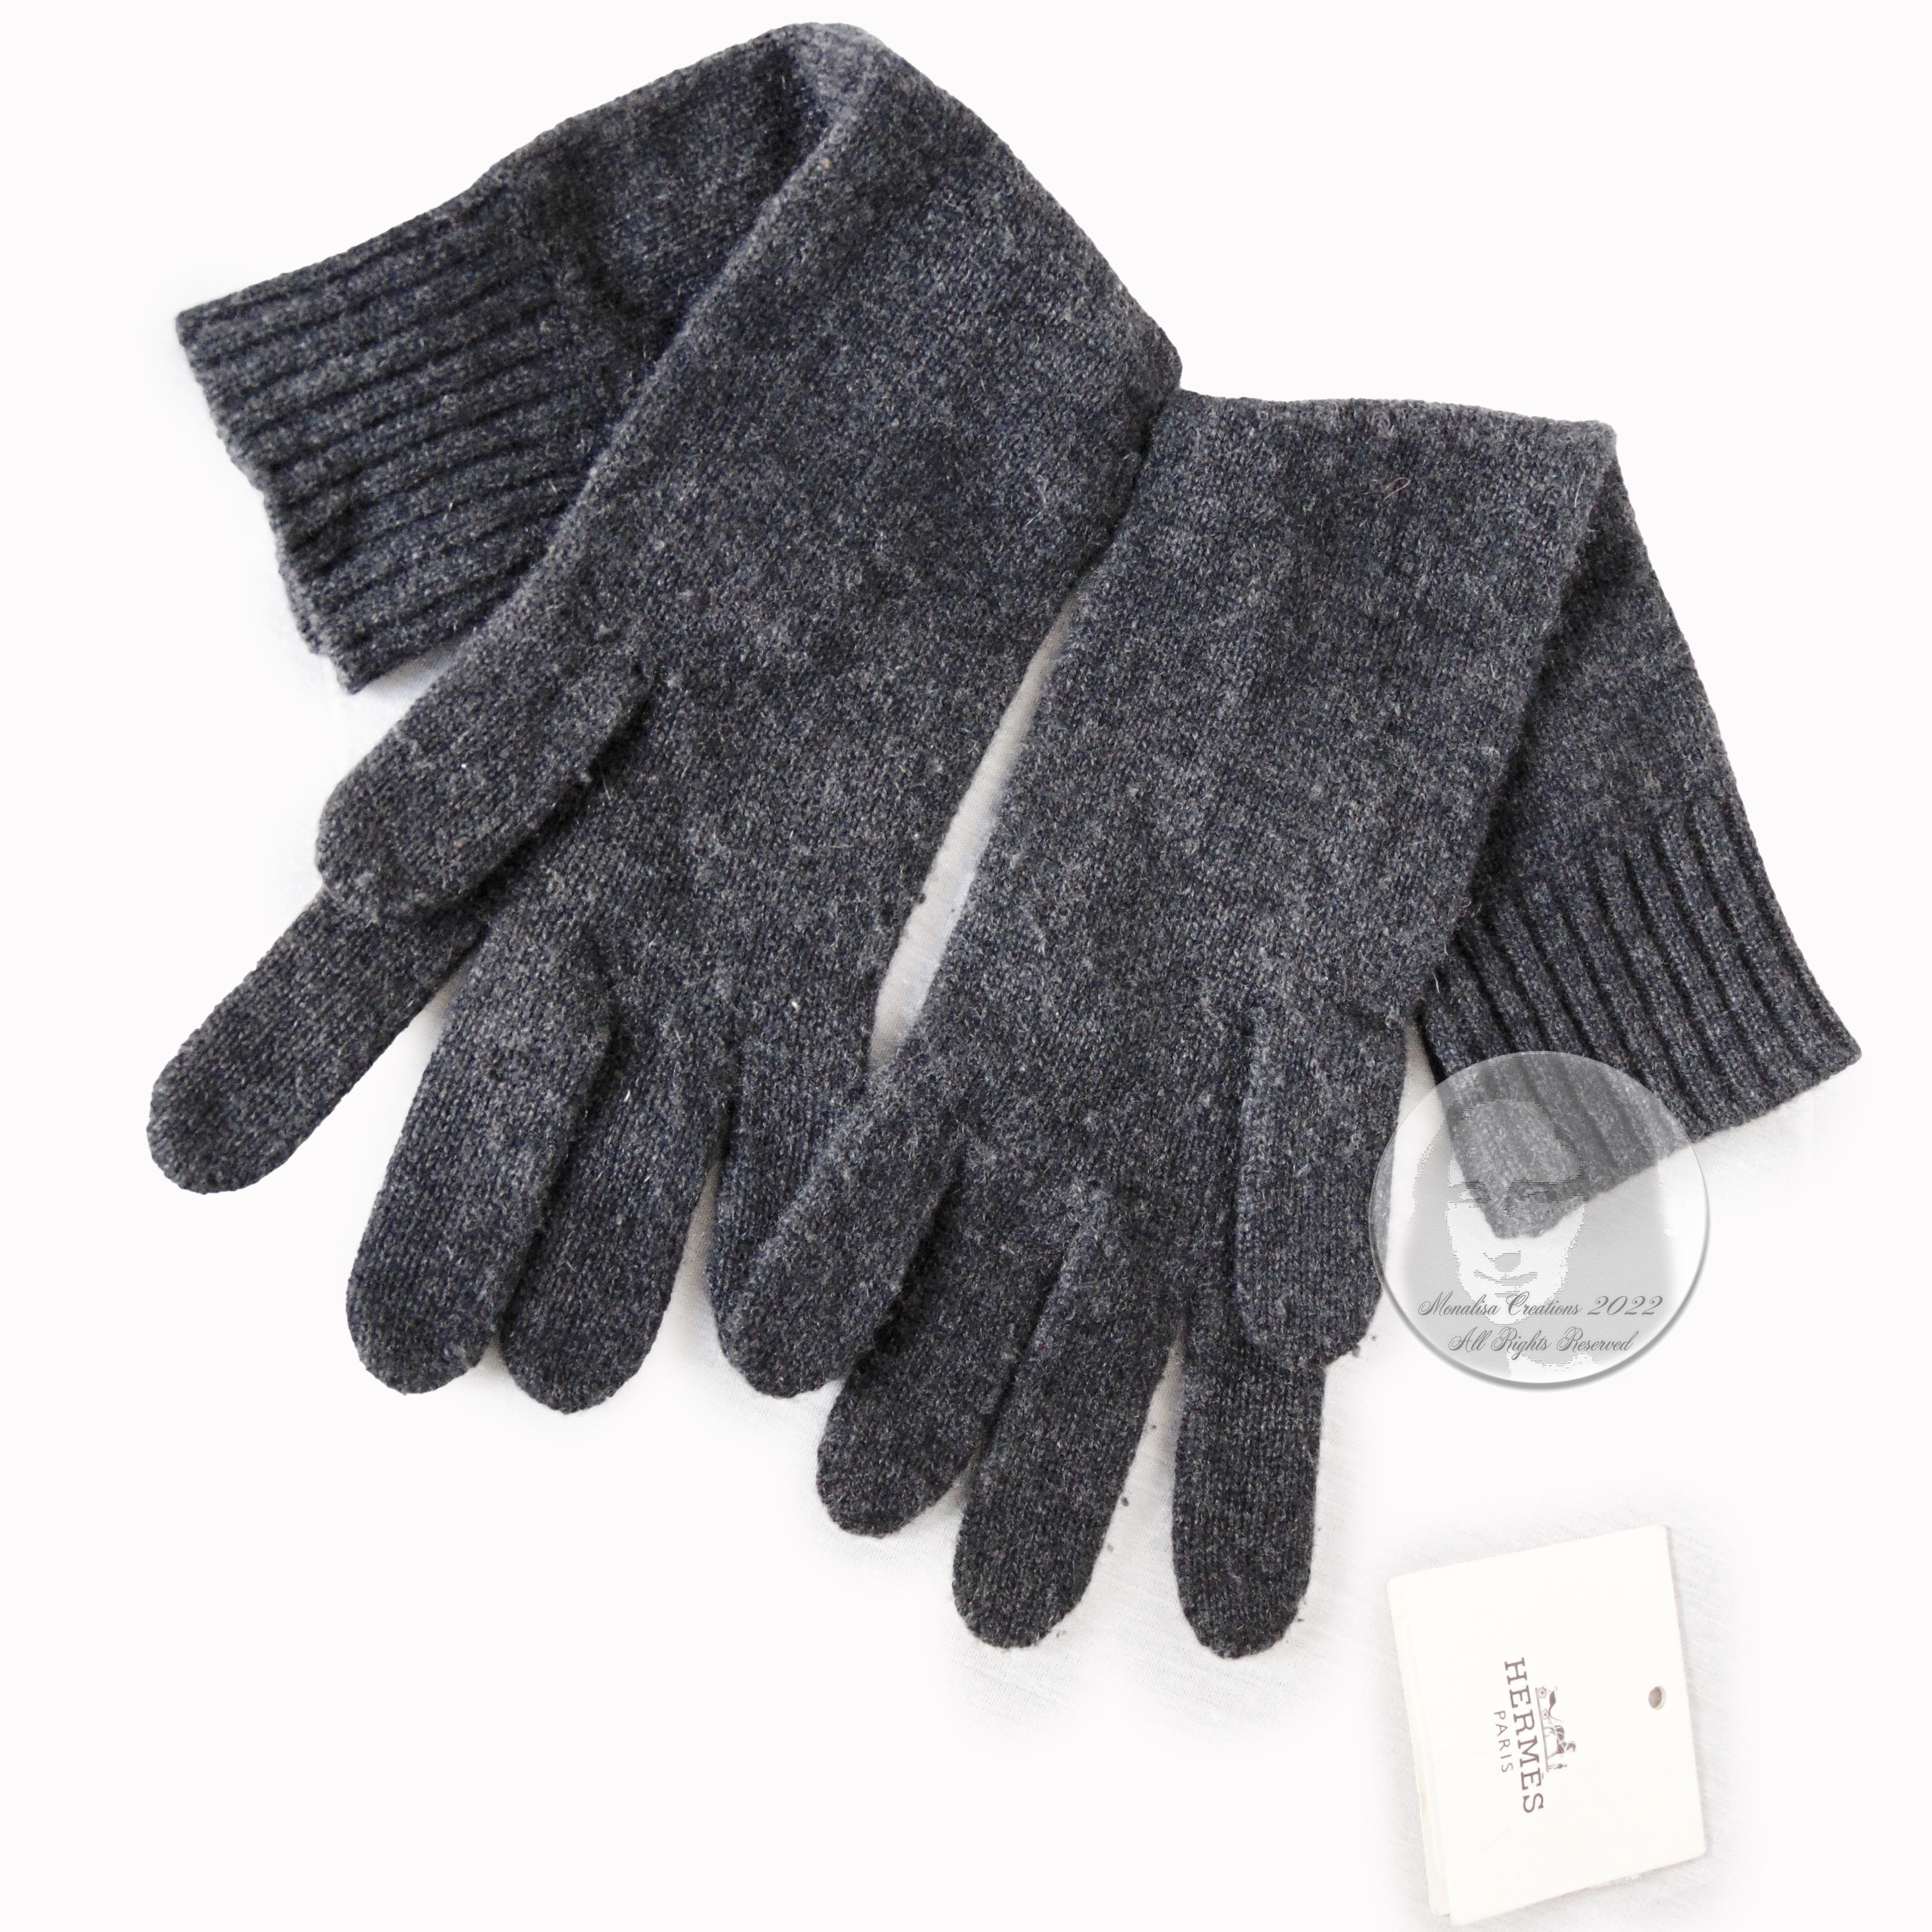 Hermes Gloves Ladies Cashmere Wool Knit Gris Charcoal Gray 1